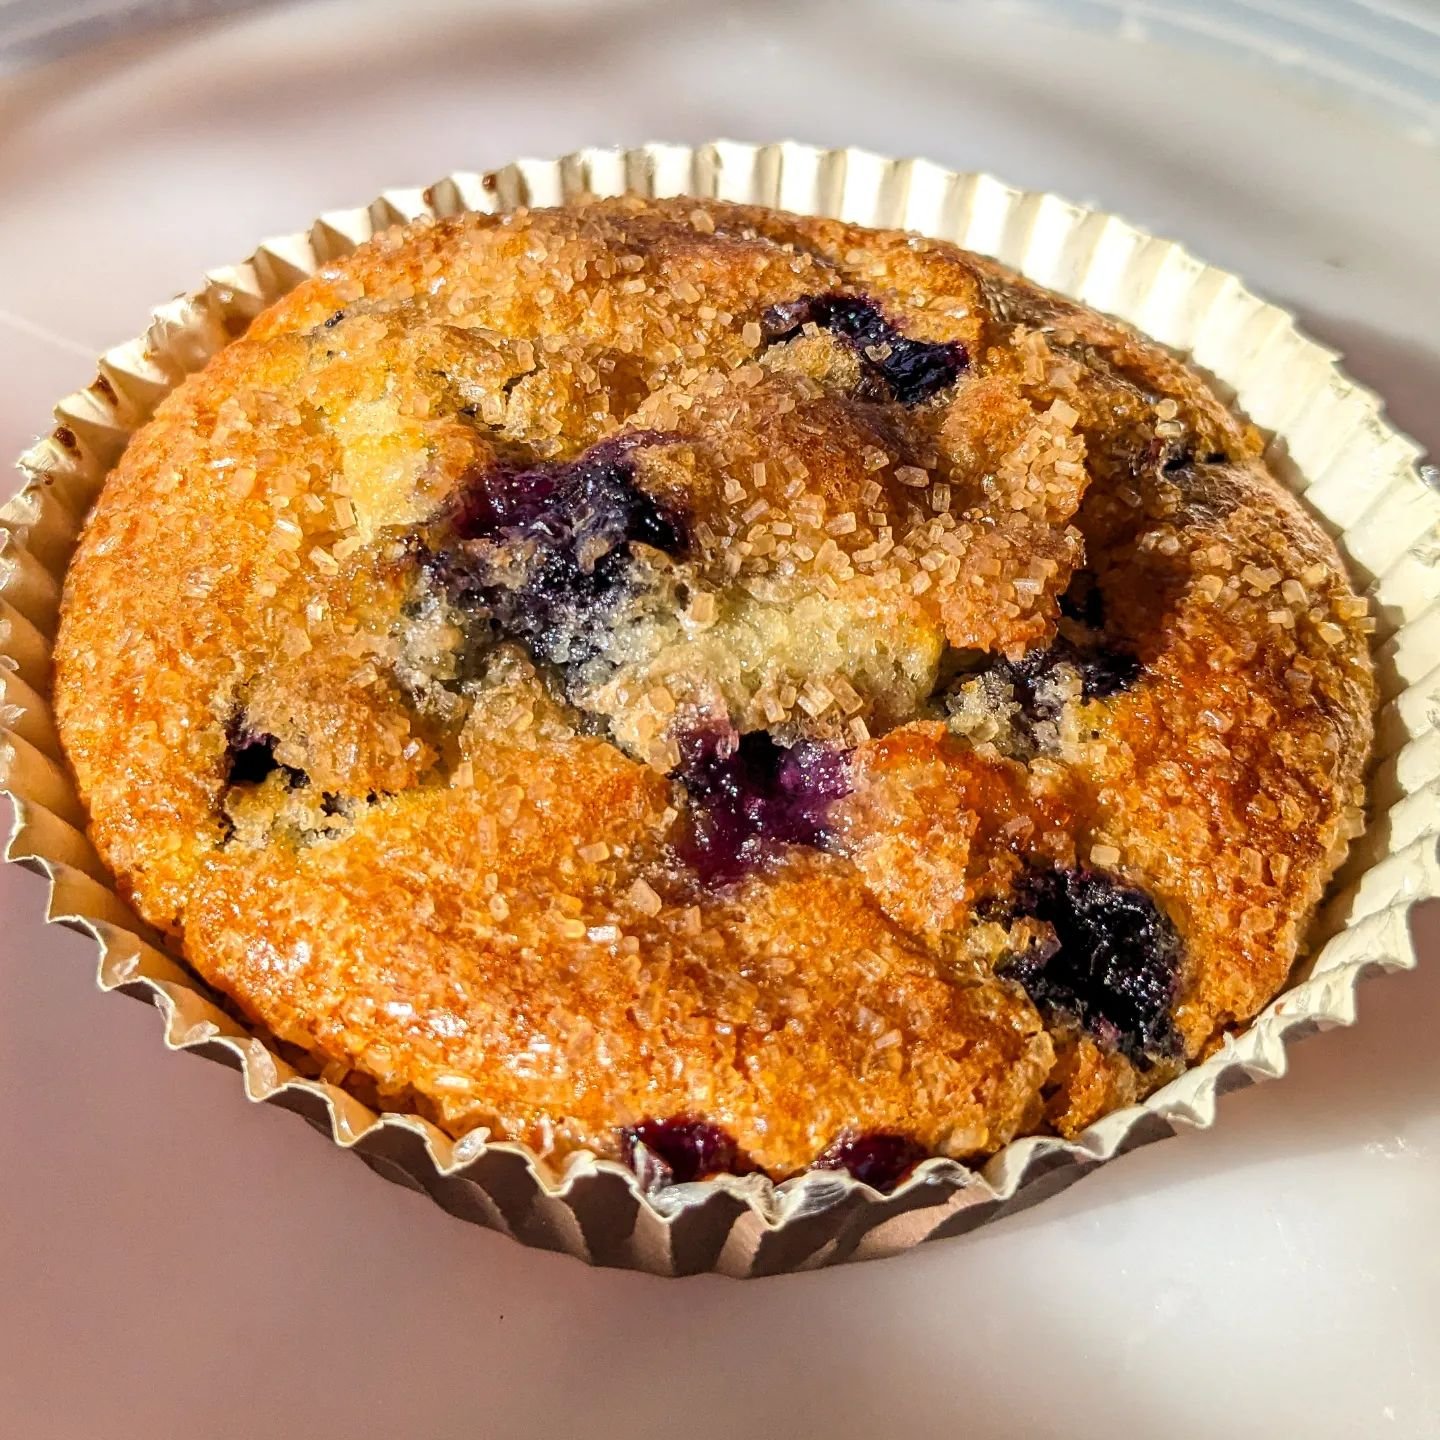 Oh man bakeday sold out fast again. Thanks to everyone who ordered or tried to order. It's cool that people like these pastries so much. 

This is the new thing on the menu this week - the blueberry muffin top! I don't know about you, but when I eat 